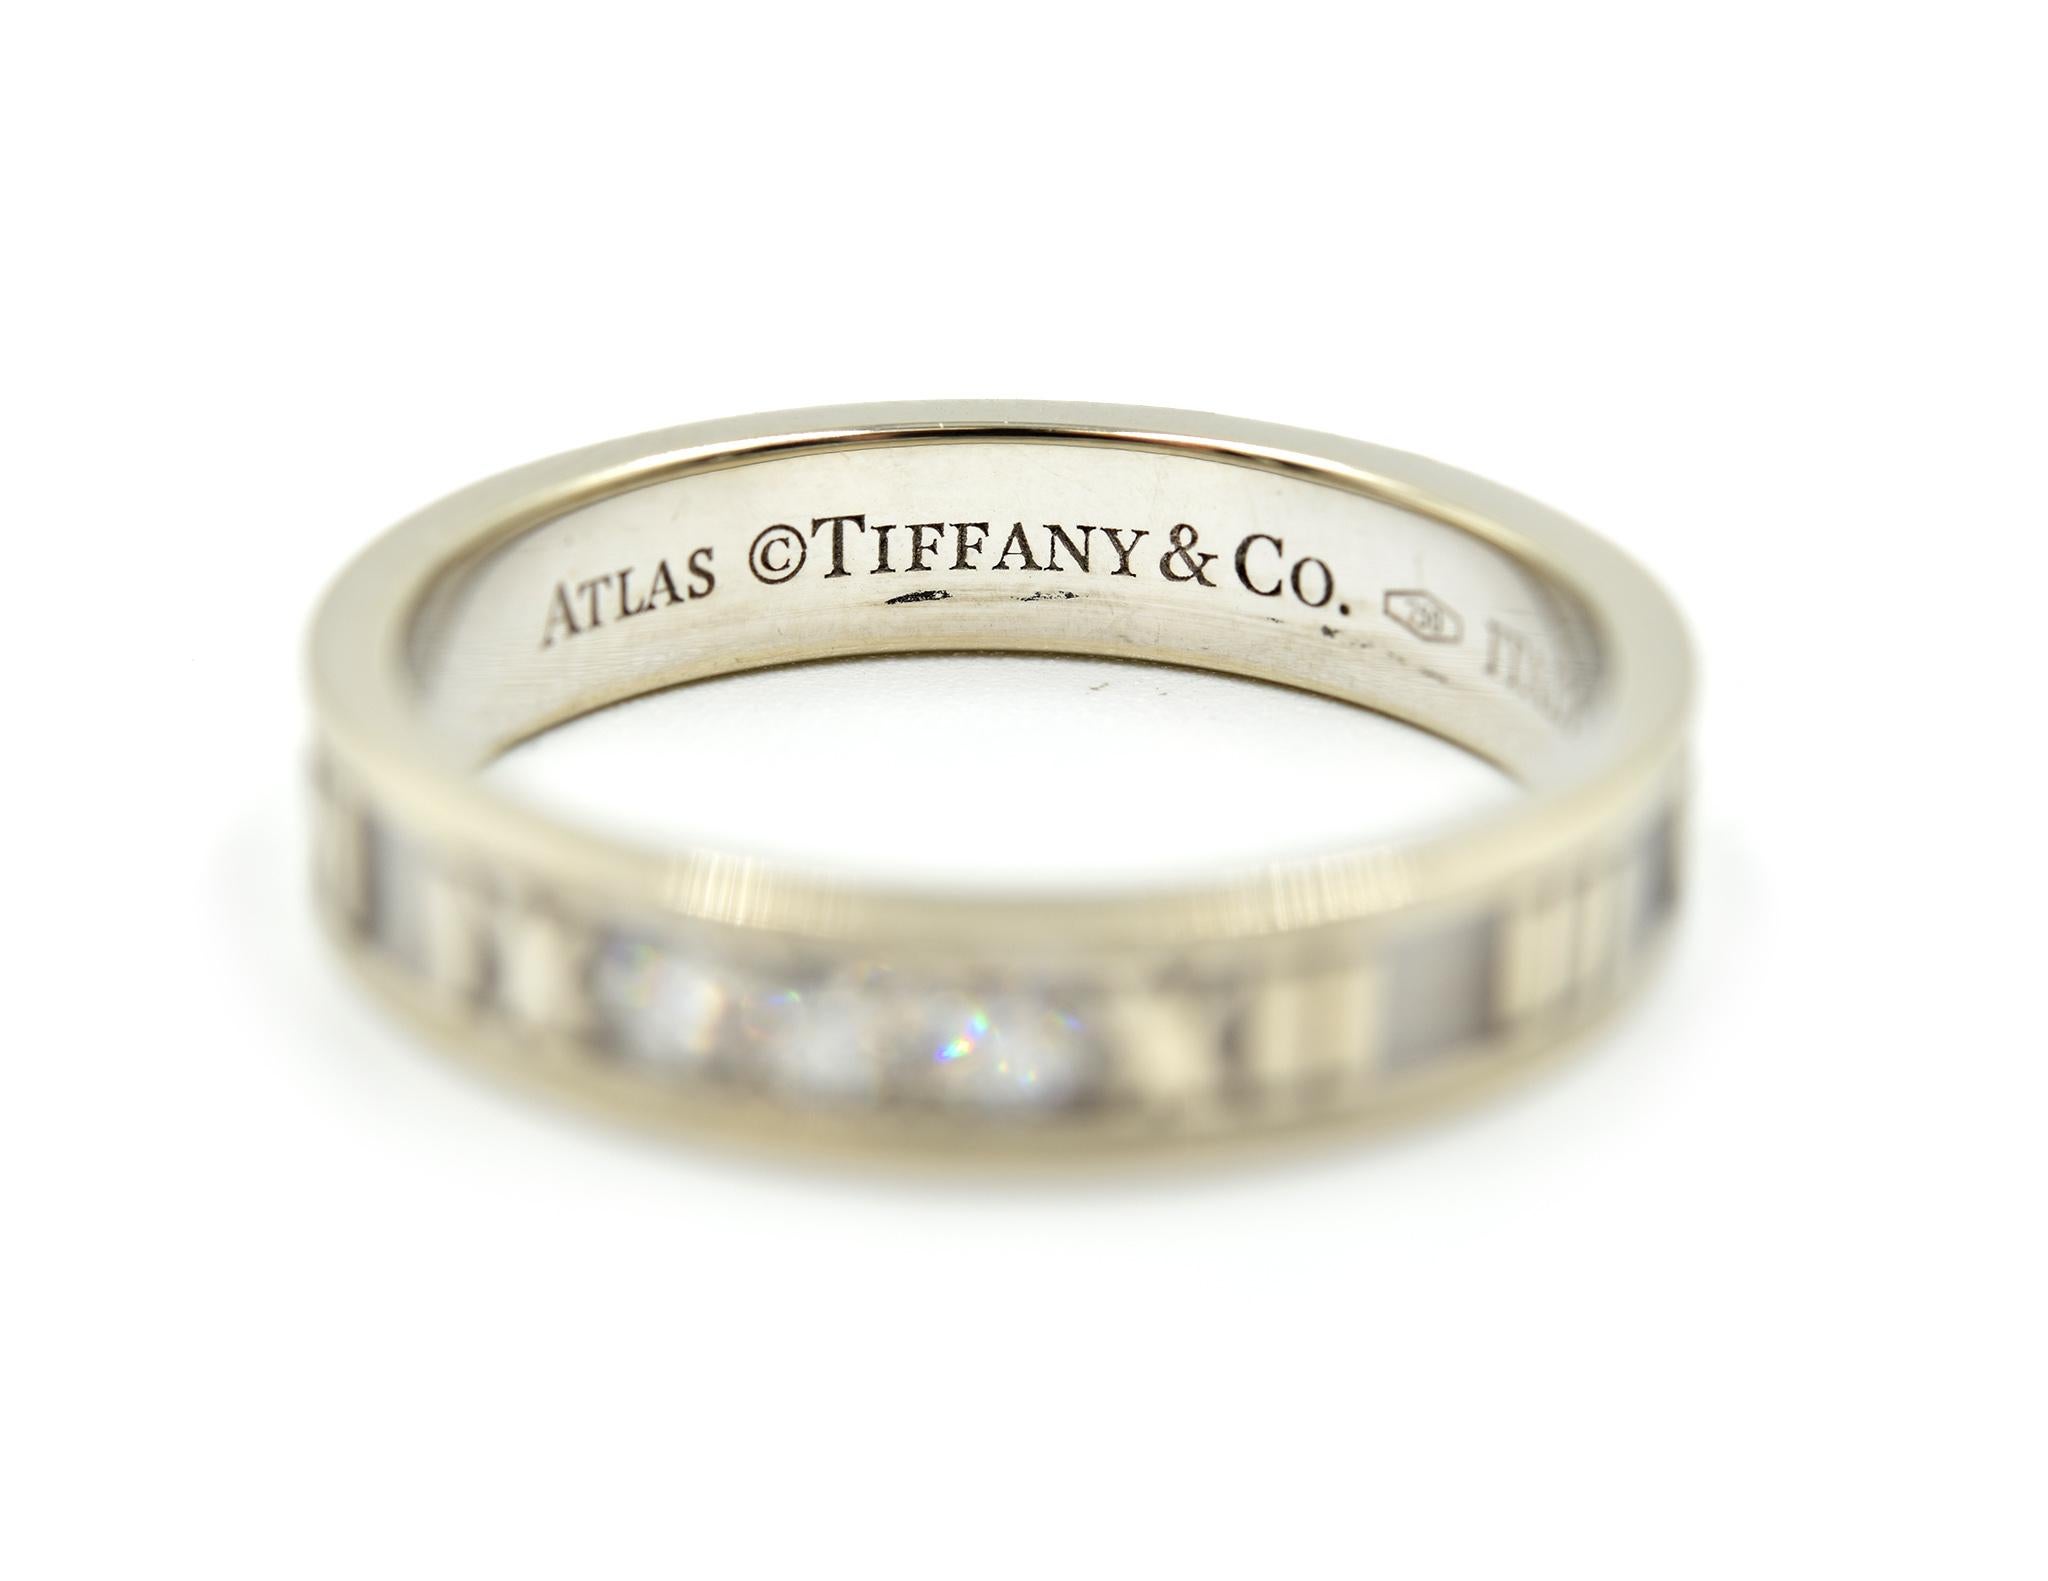 This band exhibits graphic sophistication and bold simple features. This is an authentic Tiffany & Co. band from the Atlas collection. This ring was made in 18k white gold, and set with 3 diamonds at the head of the ring. The diamonds have a